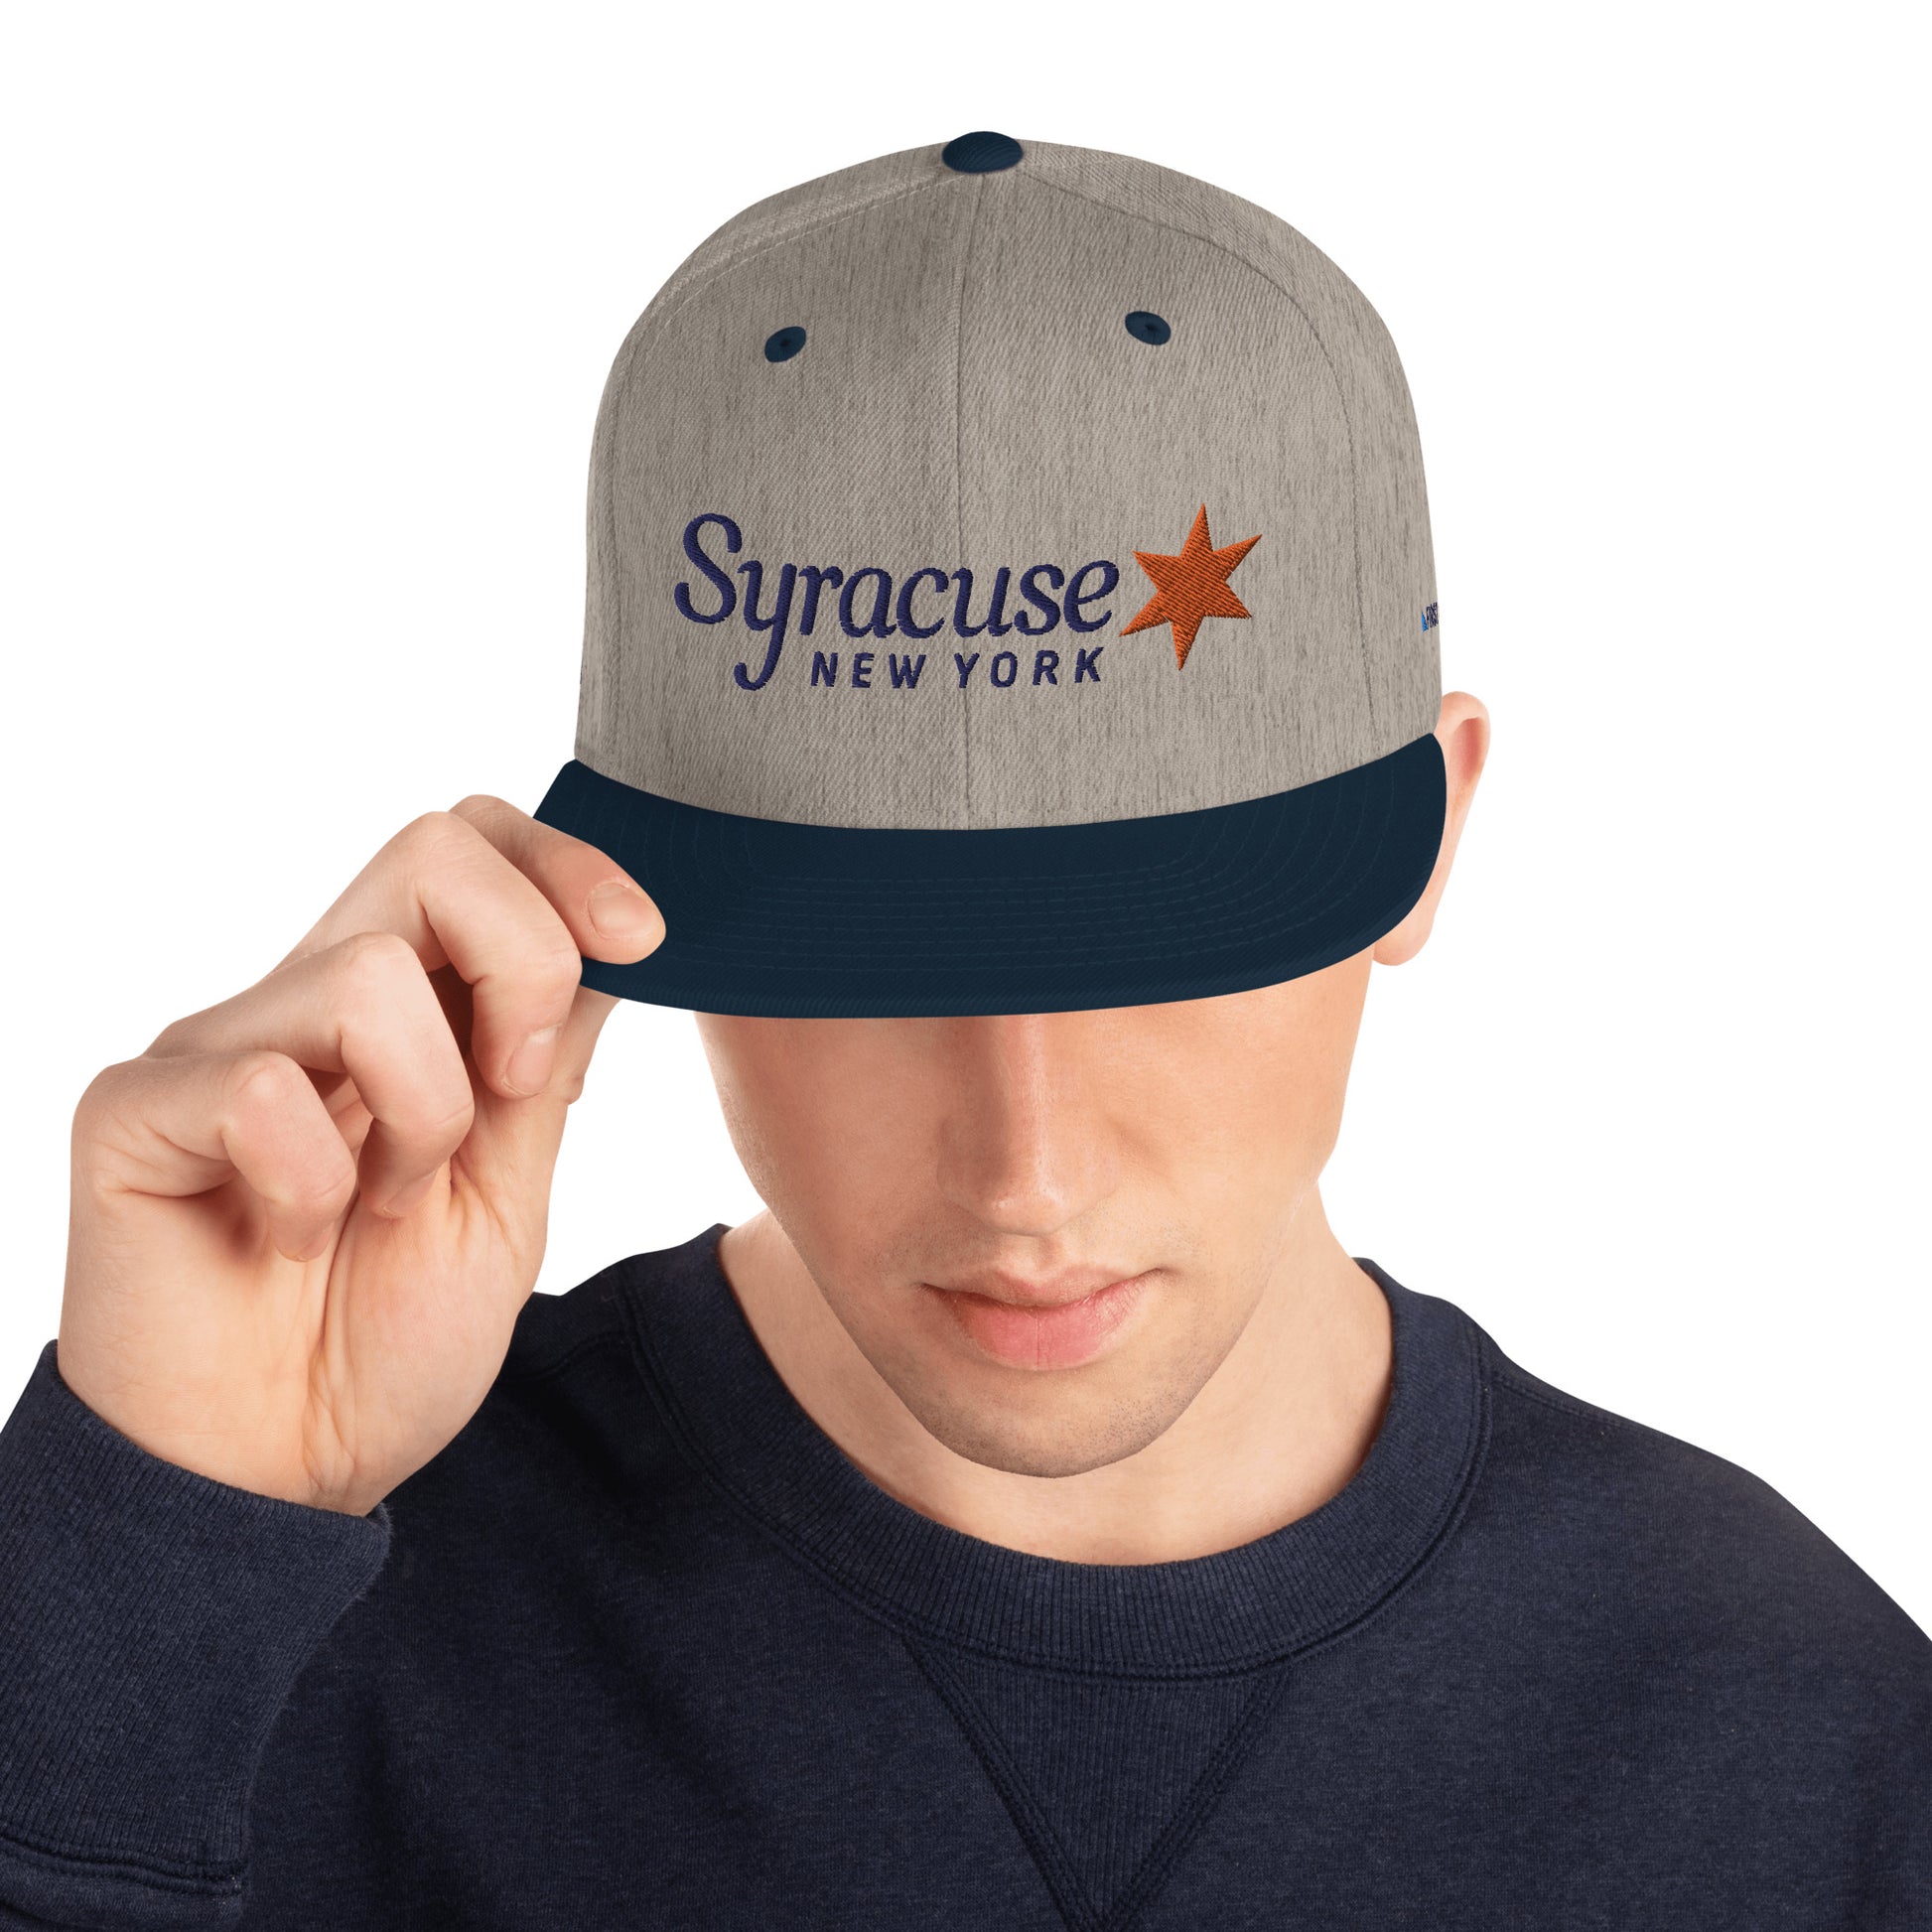 A man facing us wearing a heather grey and navy blue Syracuse, NY city flag hat with an embroidered Syracuse, NY logo